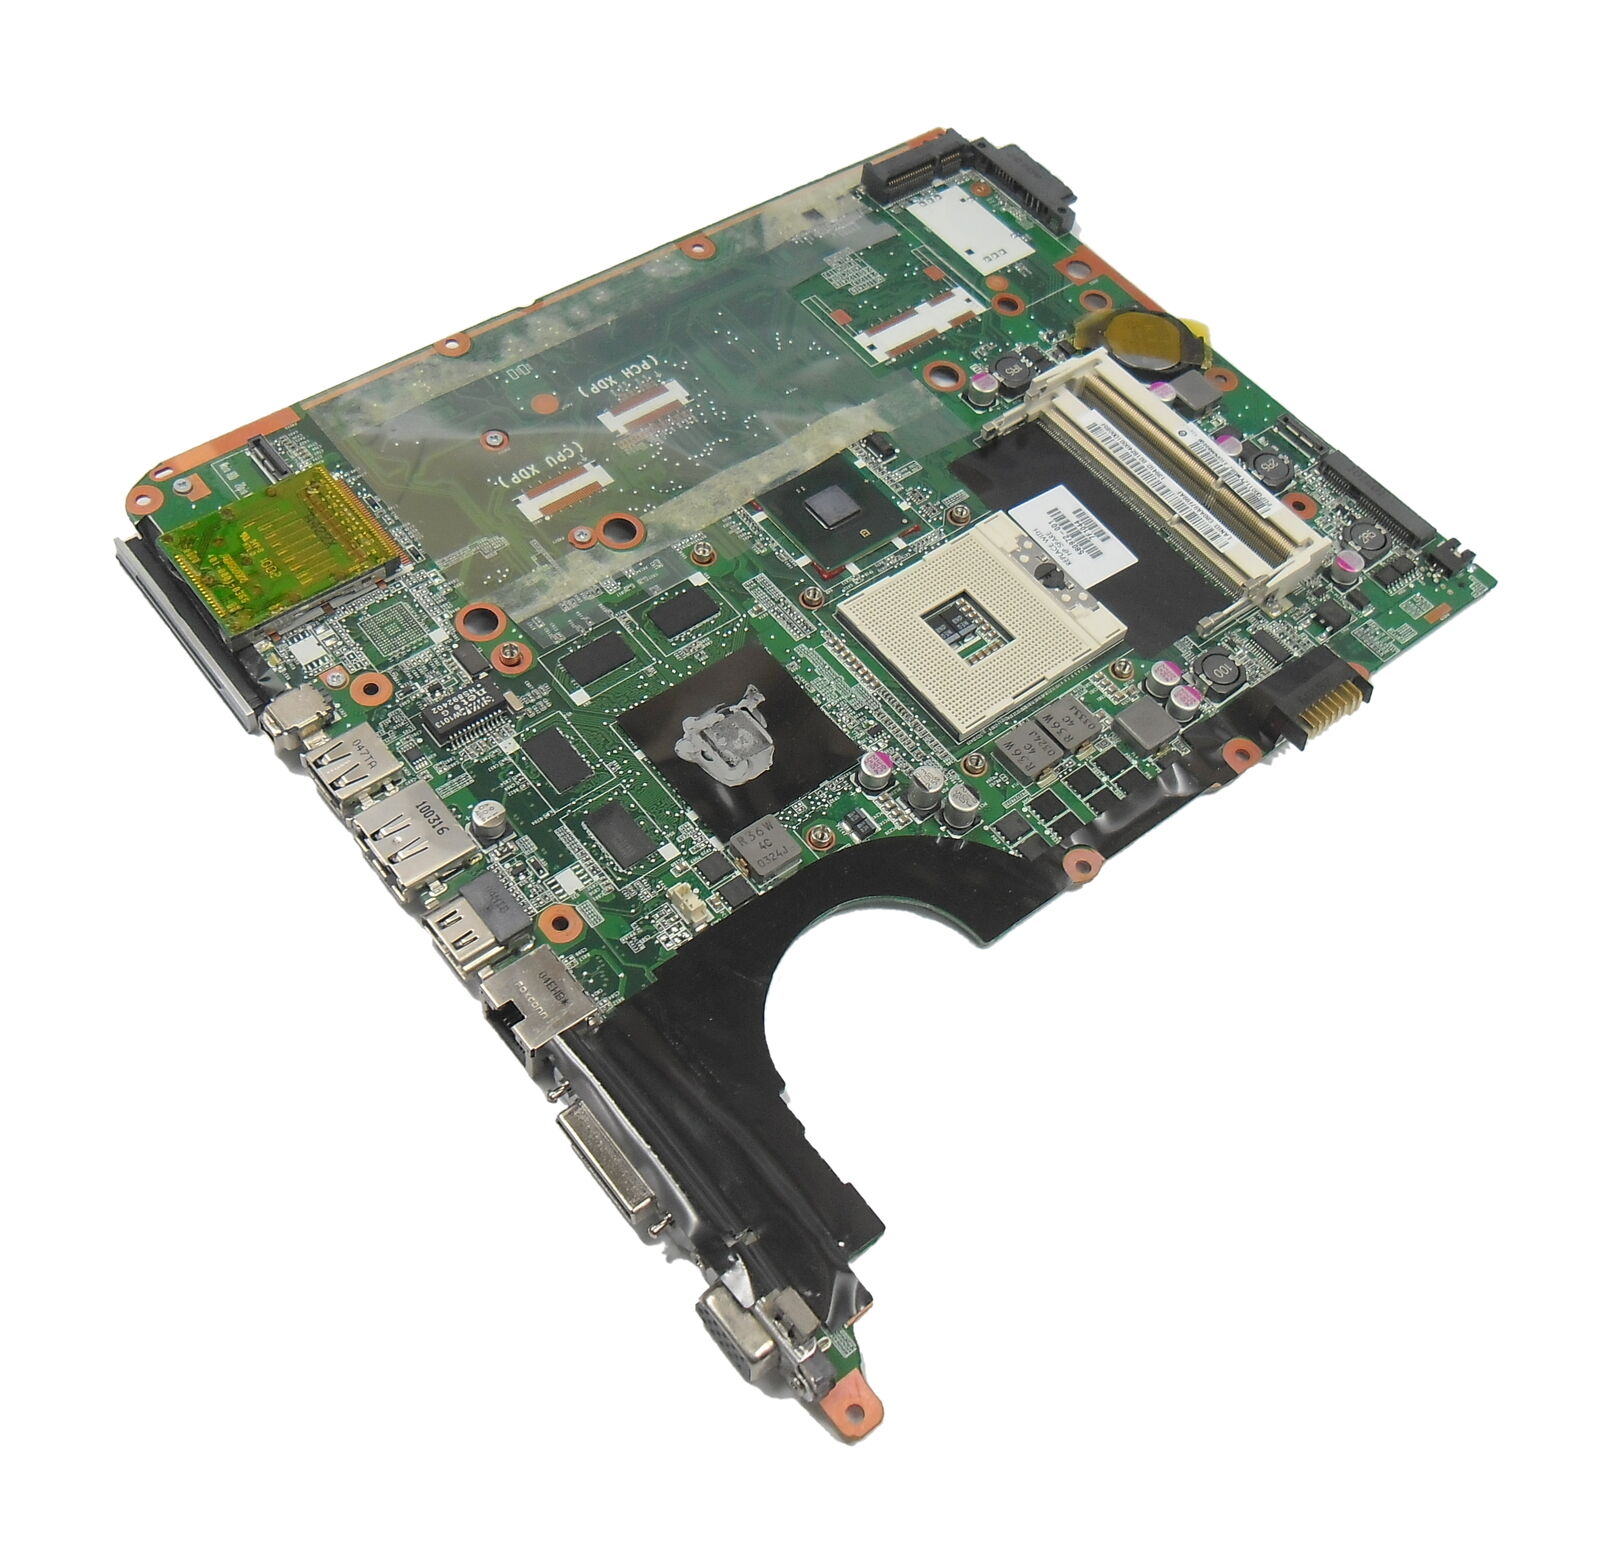 580972-001 HP Pavilion dv7-3110ea Notebook Motherboard Condition Used Codes and Manufacturer Data Brand - H